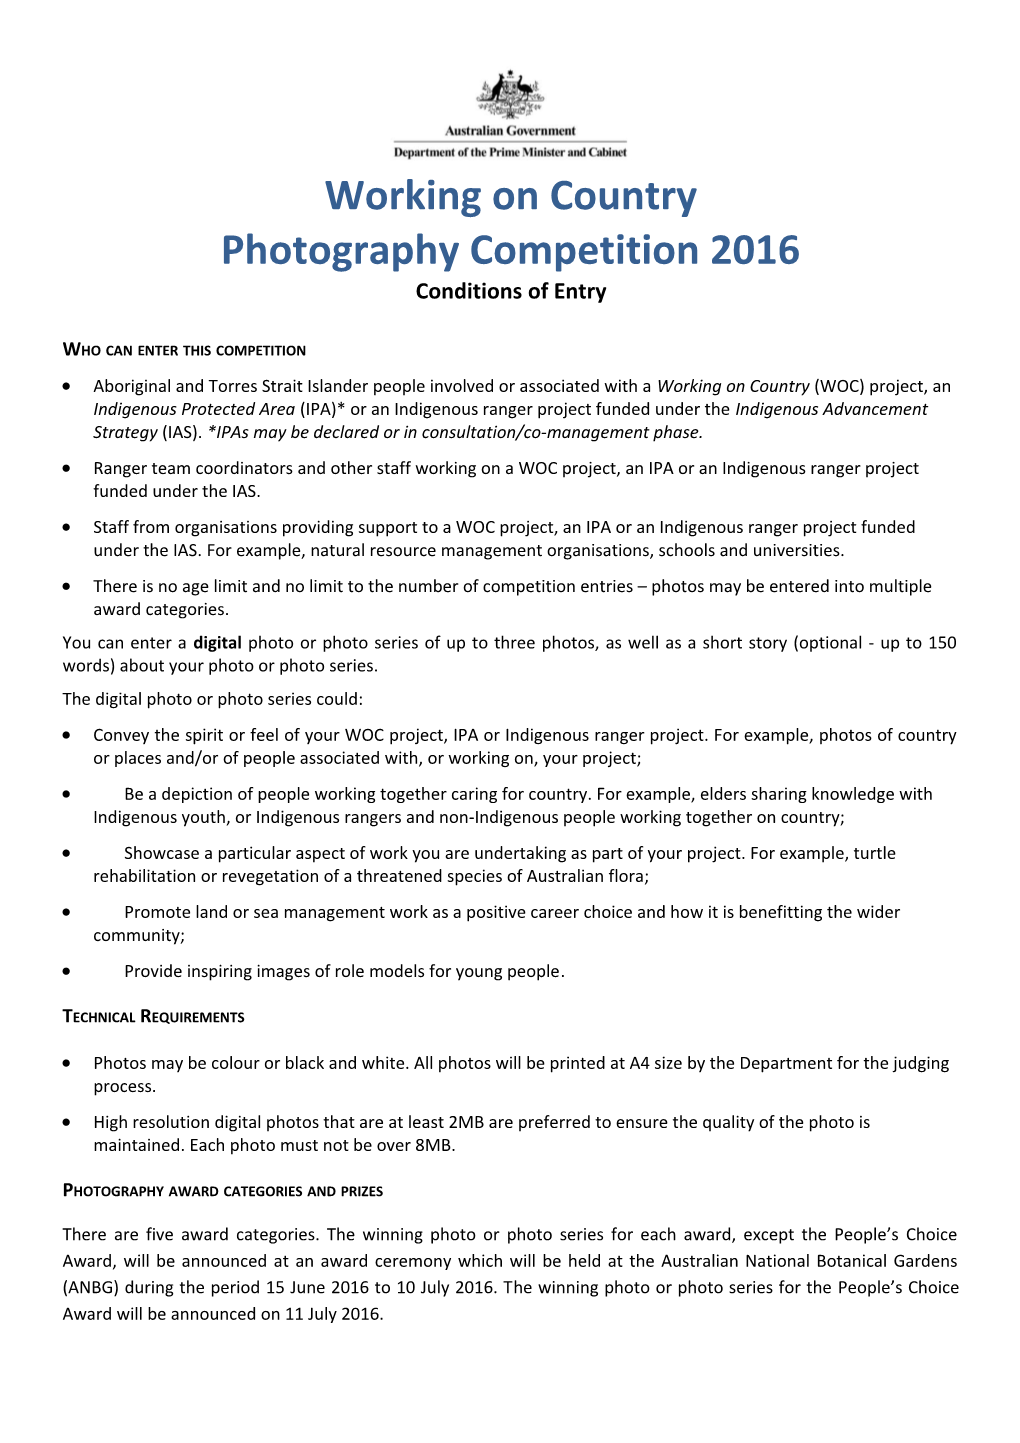 Working on Country - Photography Competition 2016: Conditions of Entry